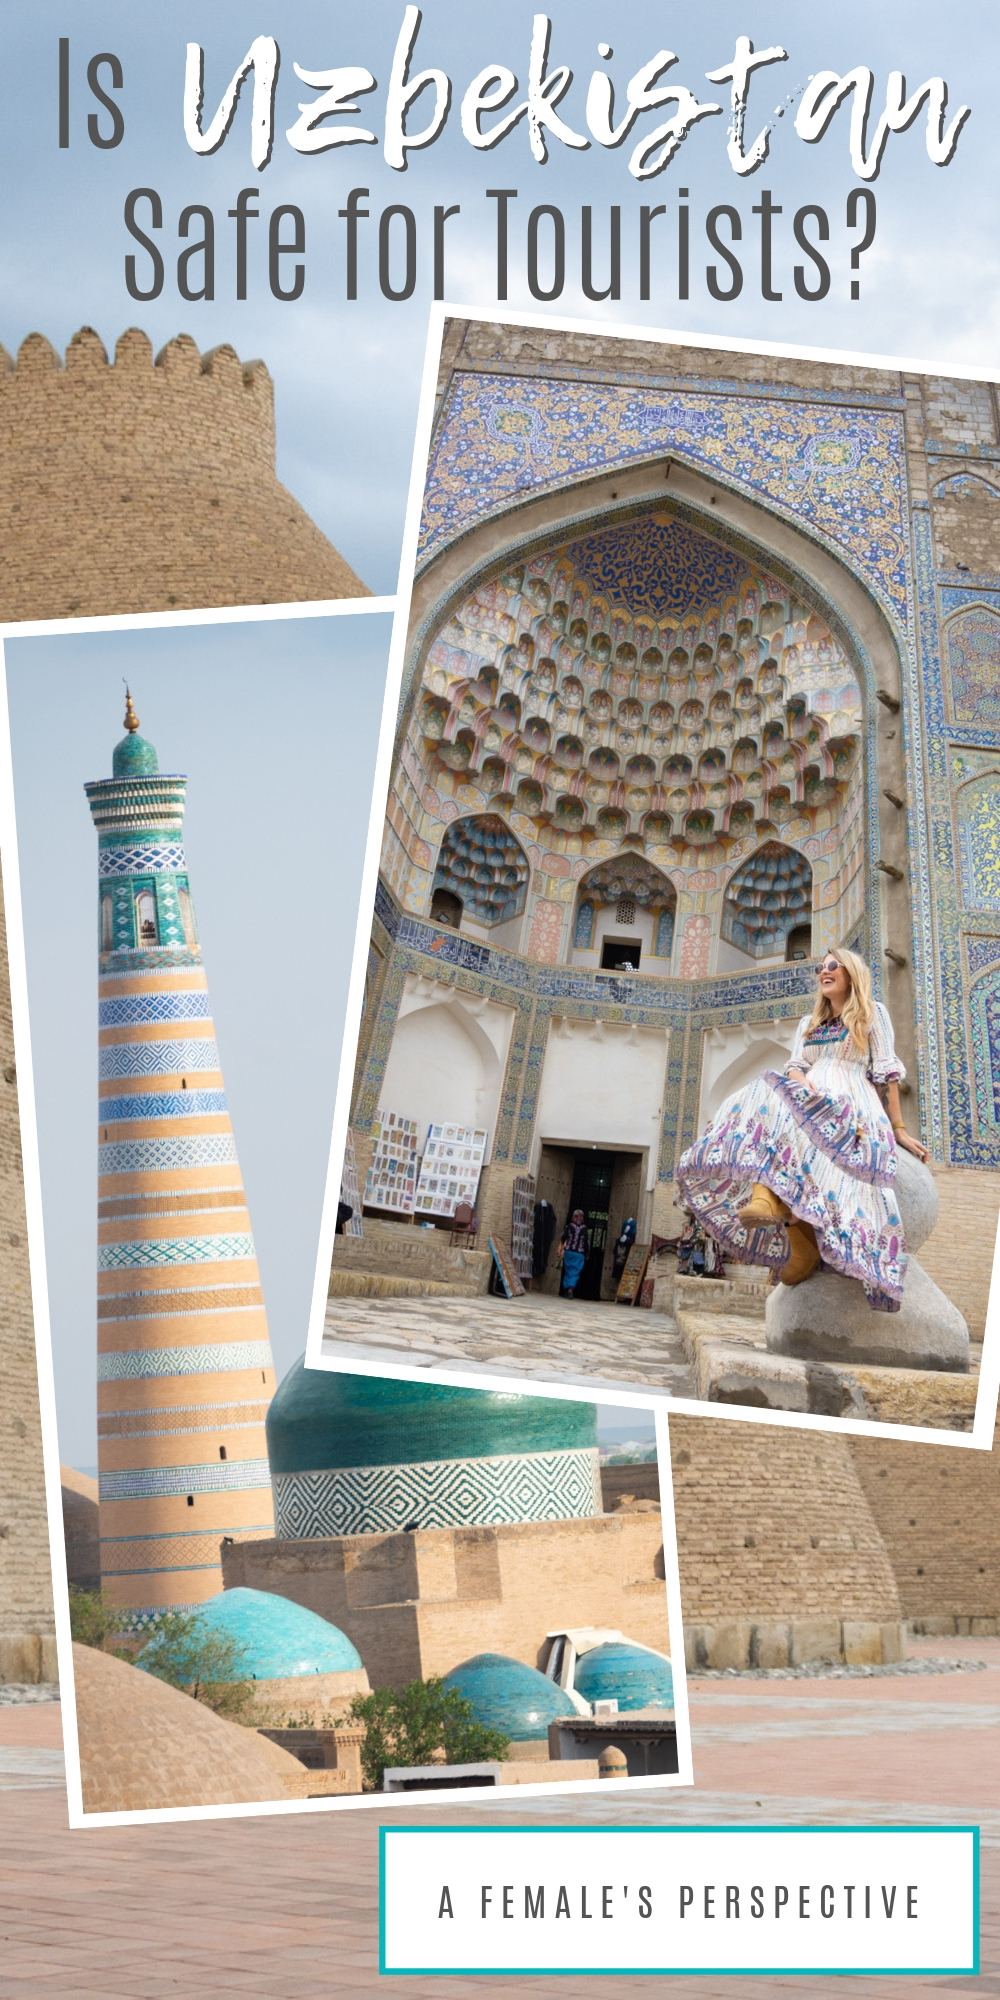 Is Uzbekistan Safe for Tourists? A Female's Perspective on Pinterest